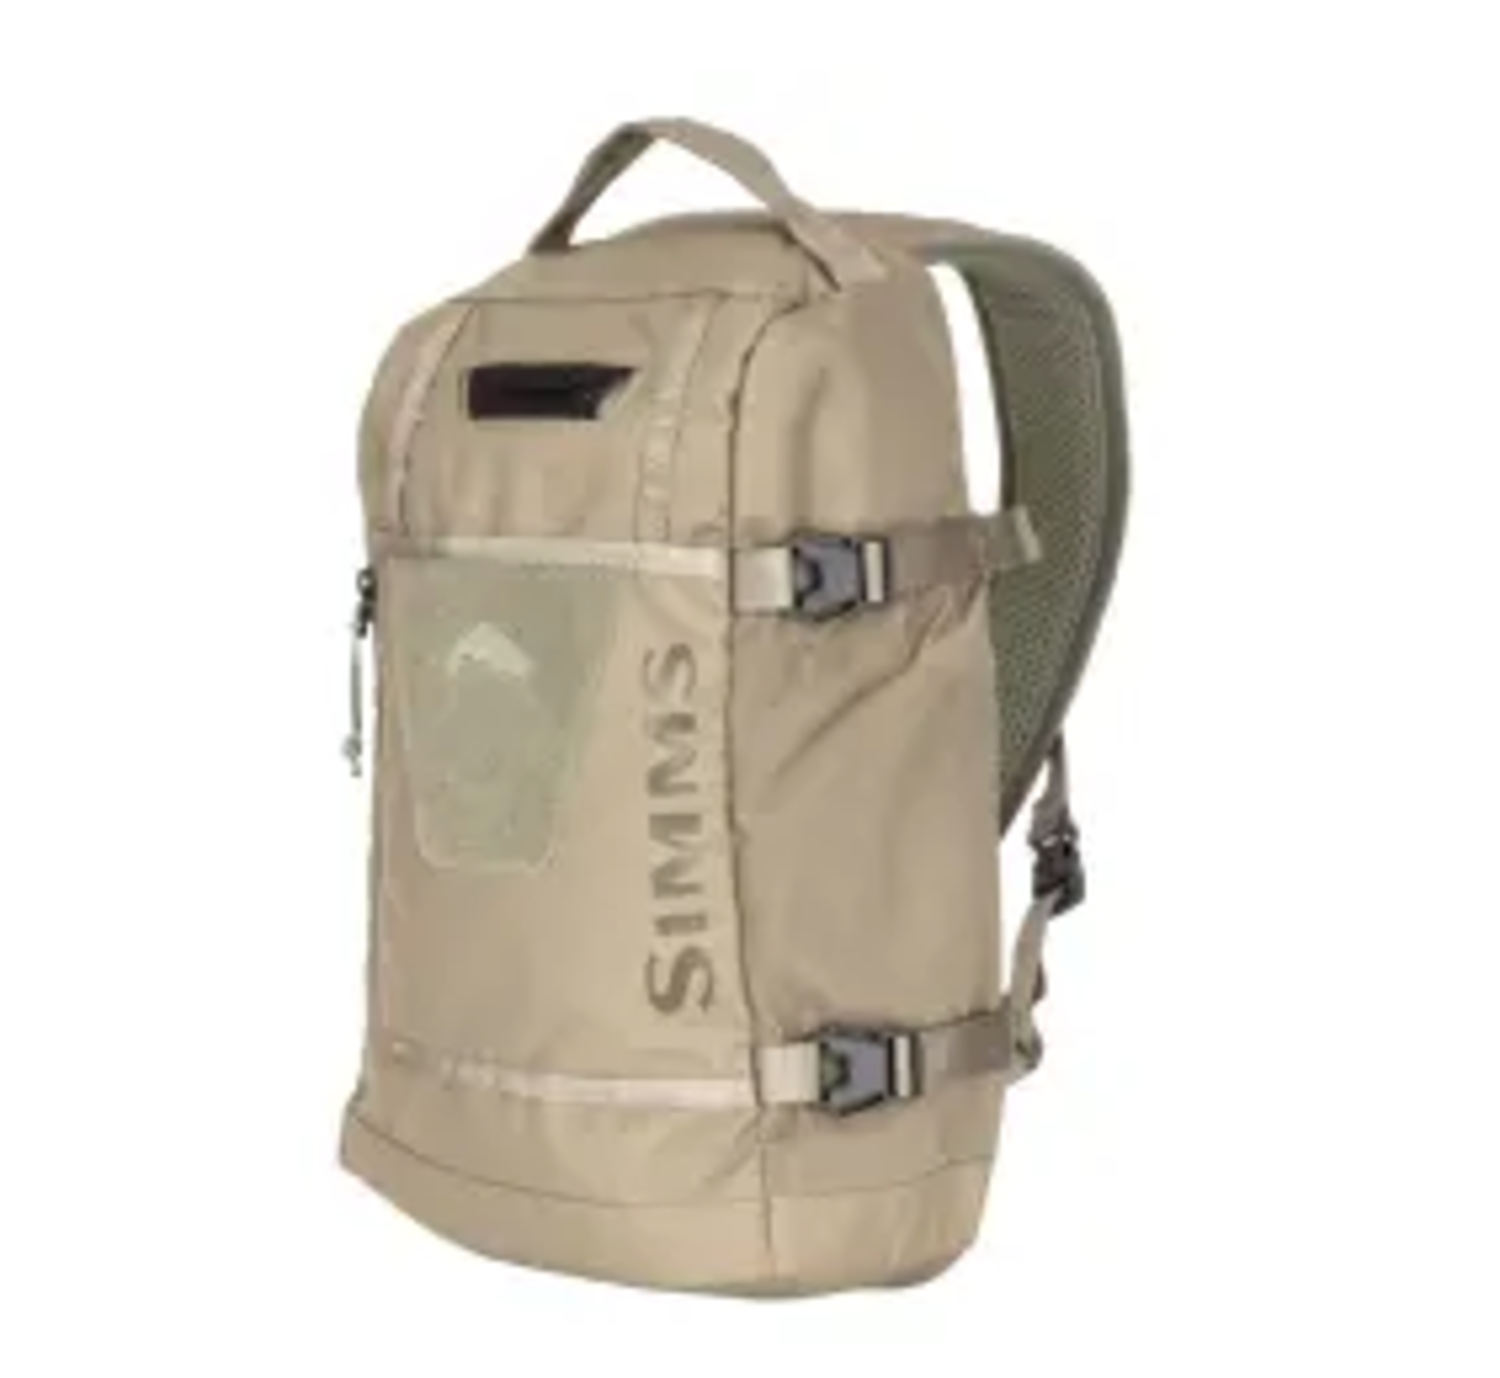 Tributary Sling Pack - The Fish Hawk